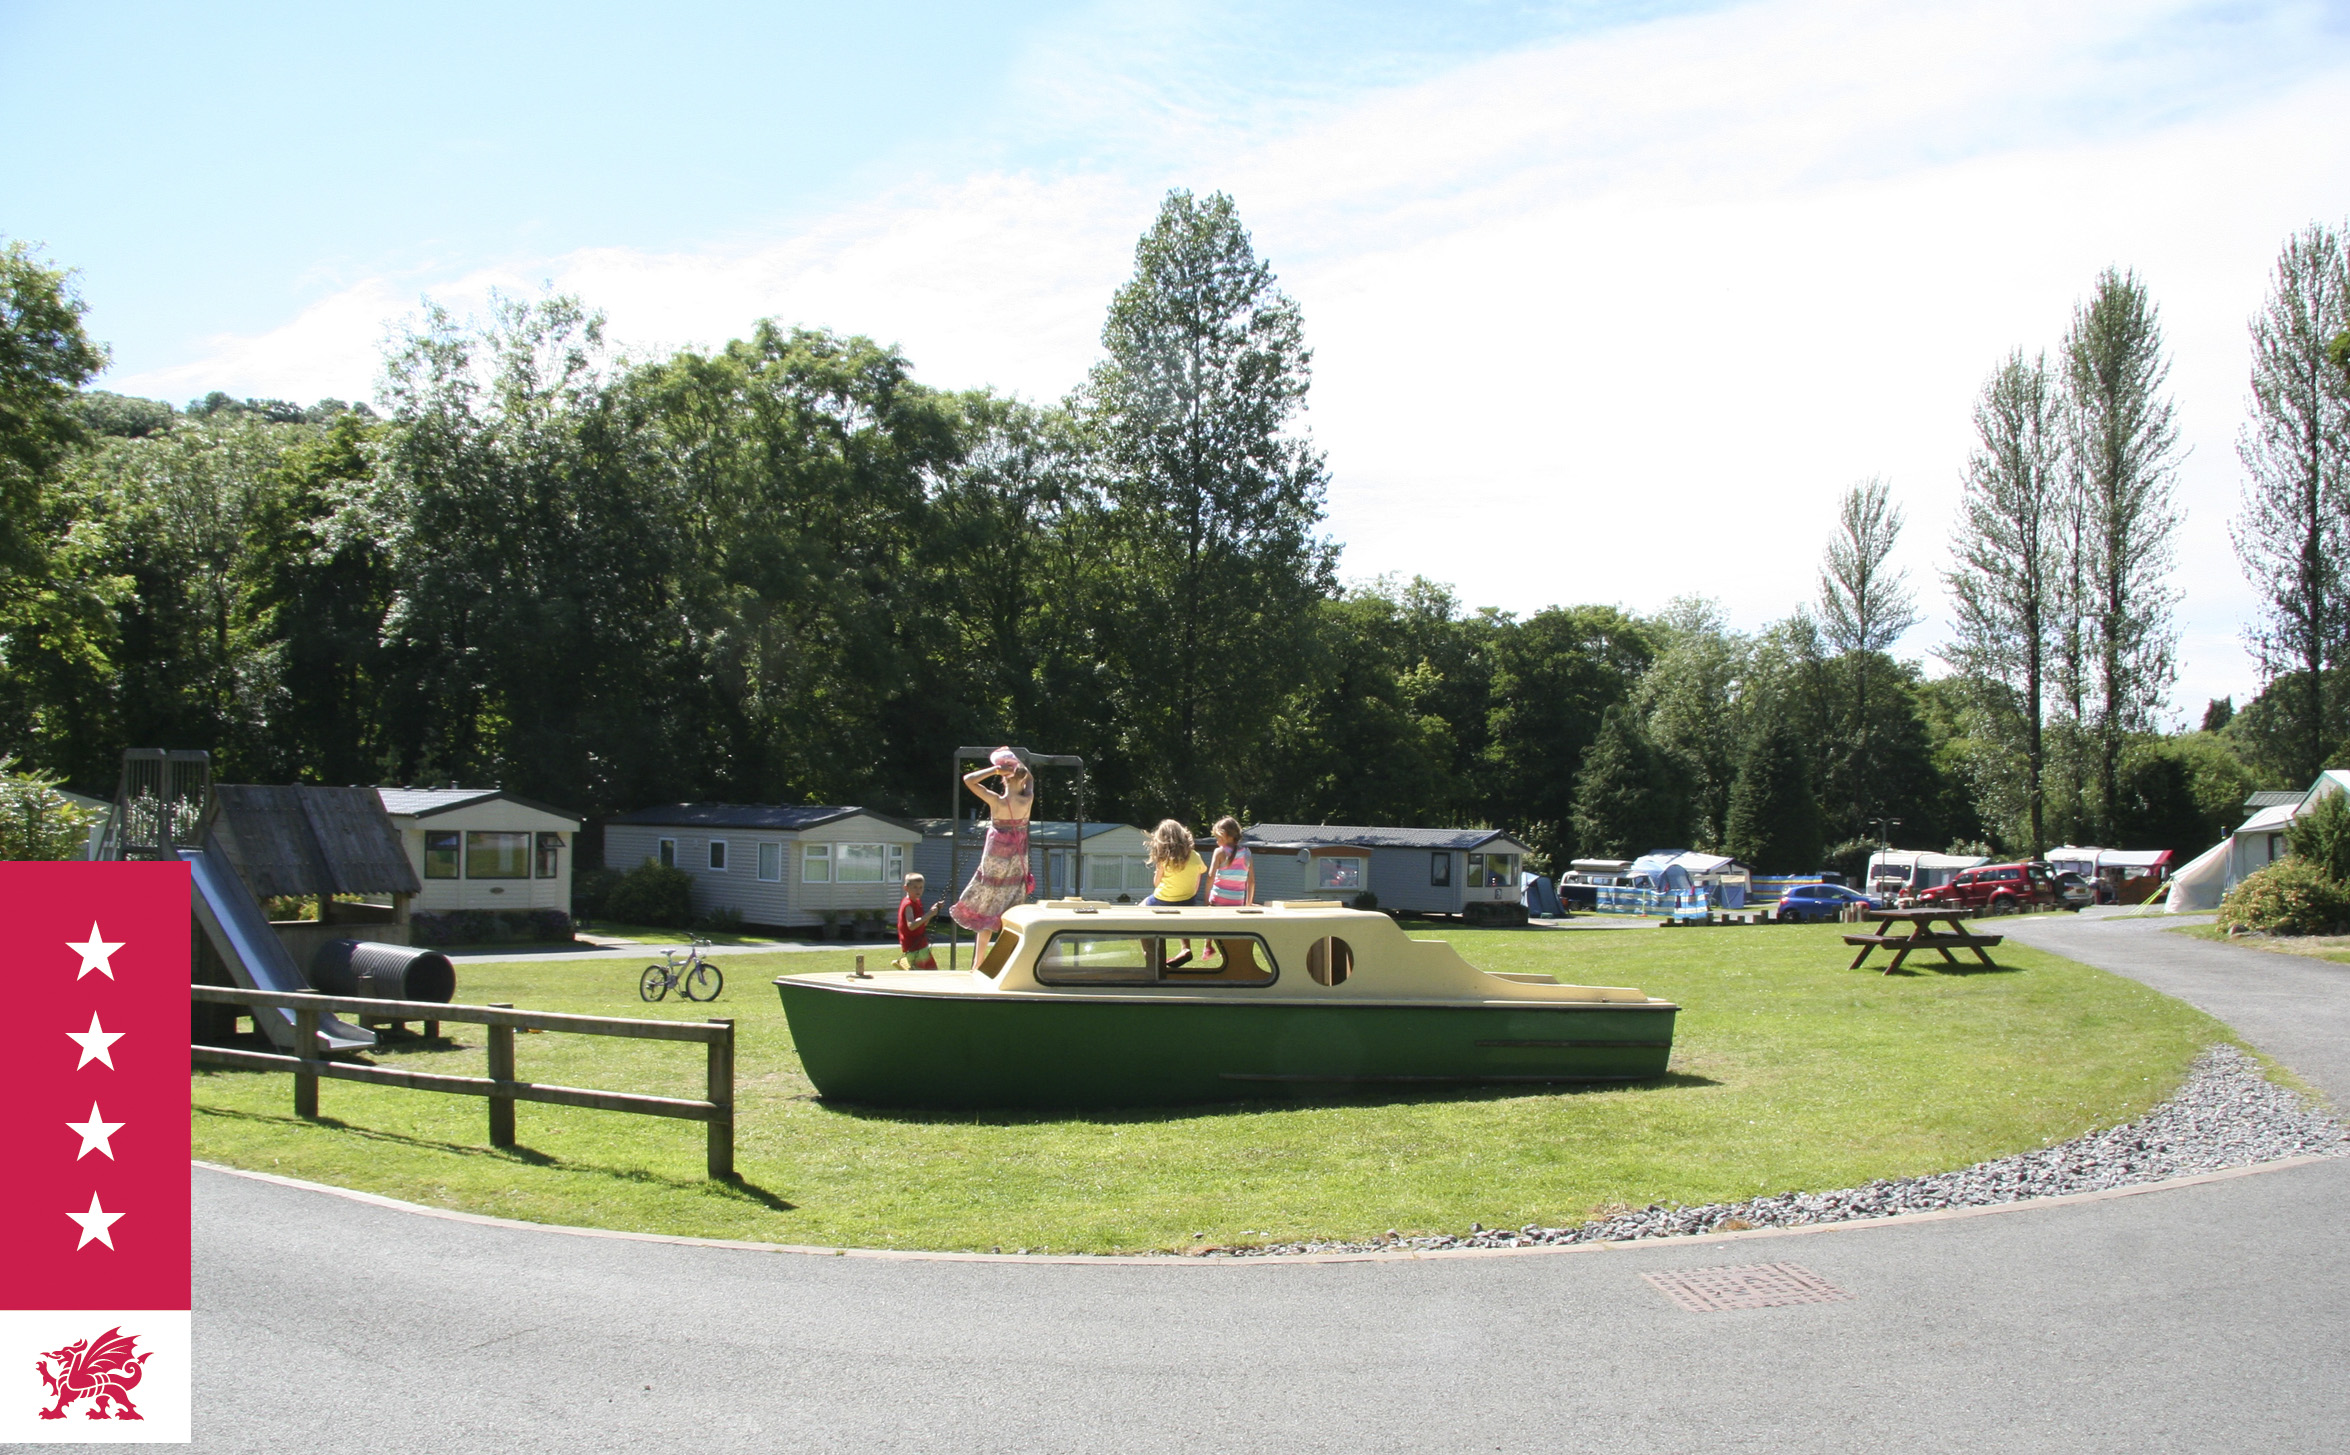 Touring Caravan Park with Tent Pitches and Static Caravan Holiday Homes situated around the central play area